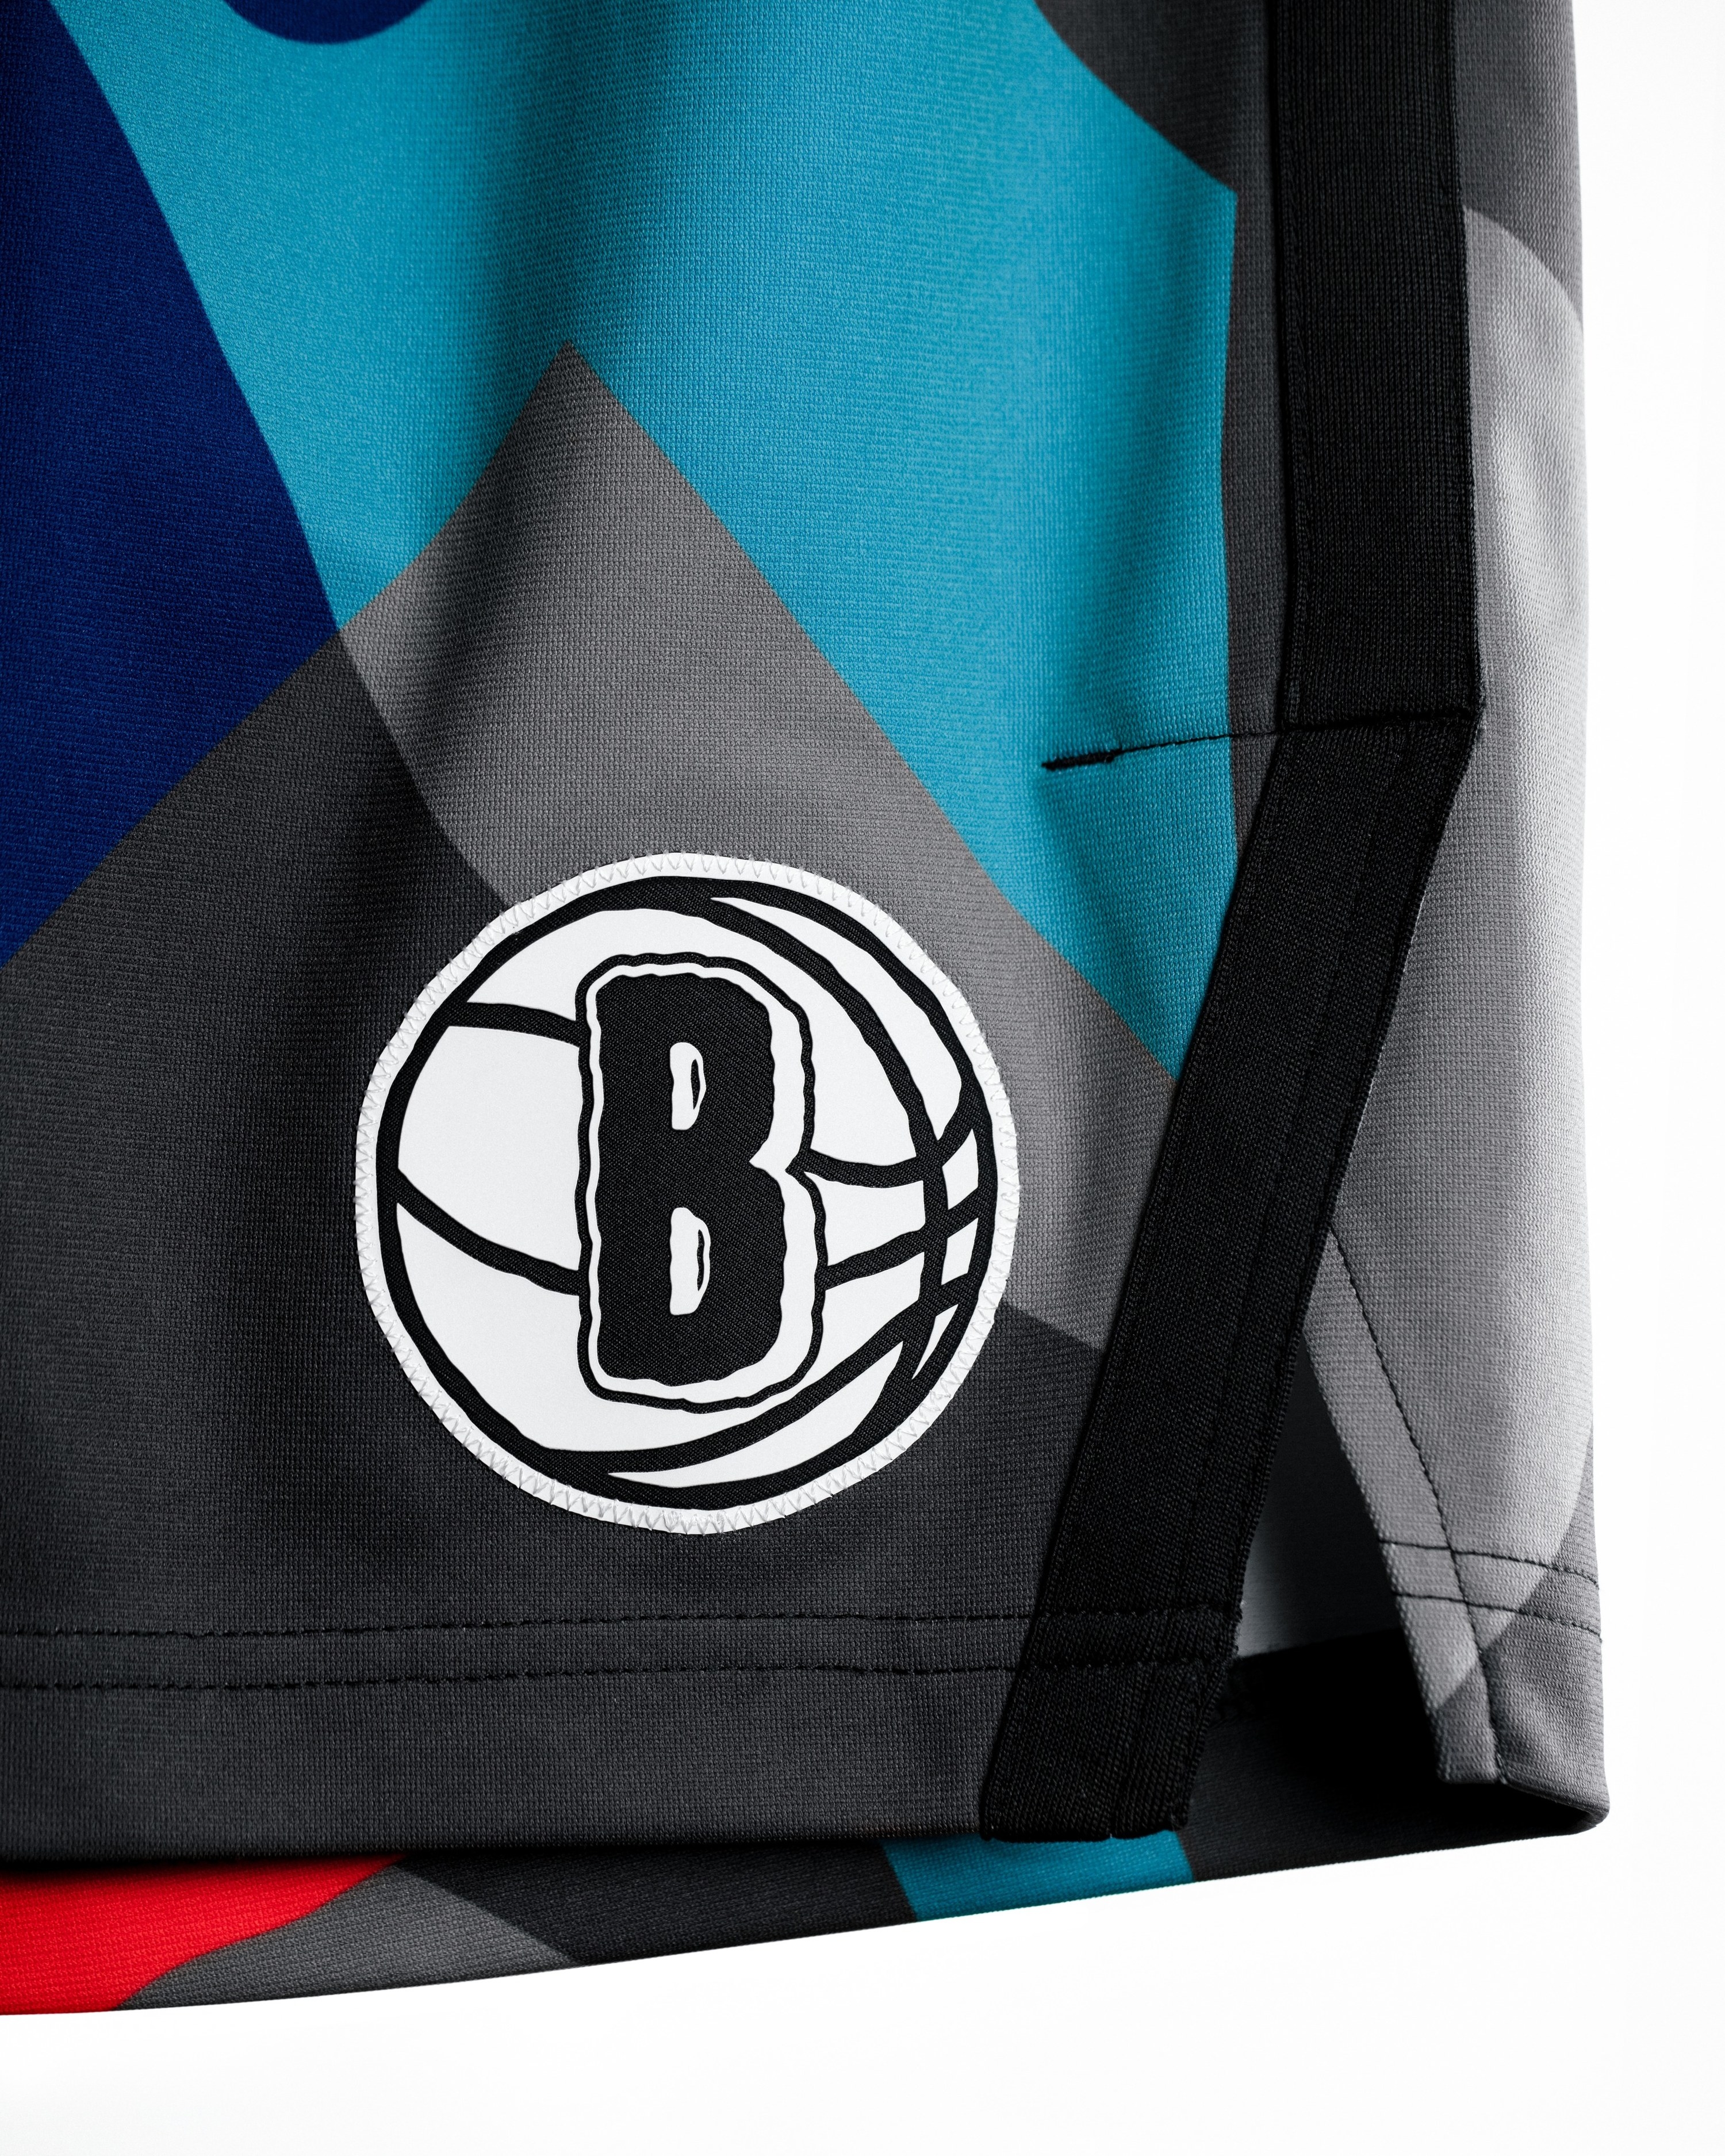 A Brooklyn Nets jersey is pictured